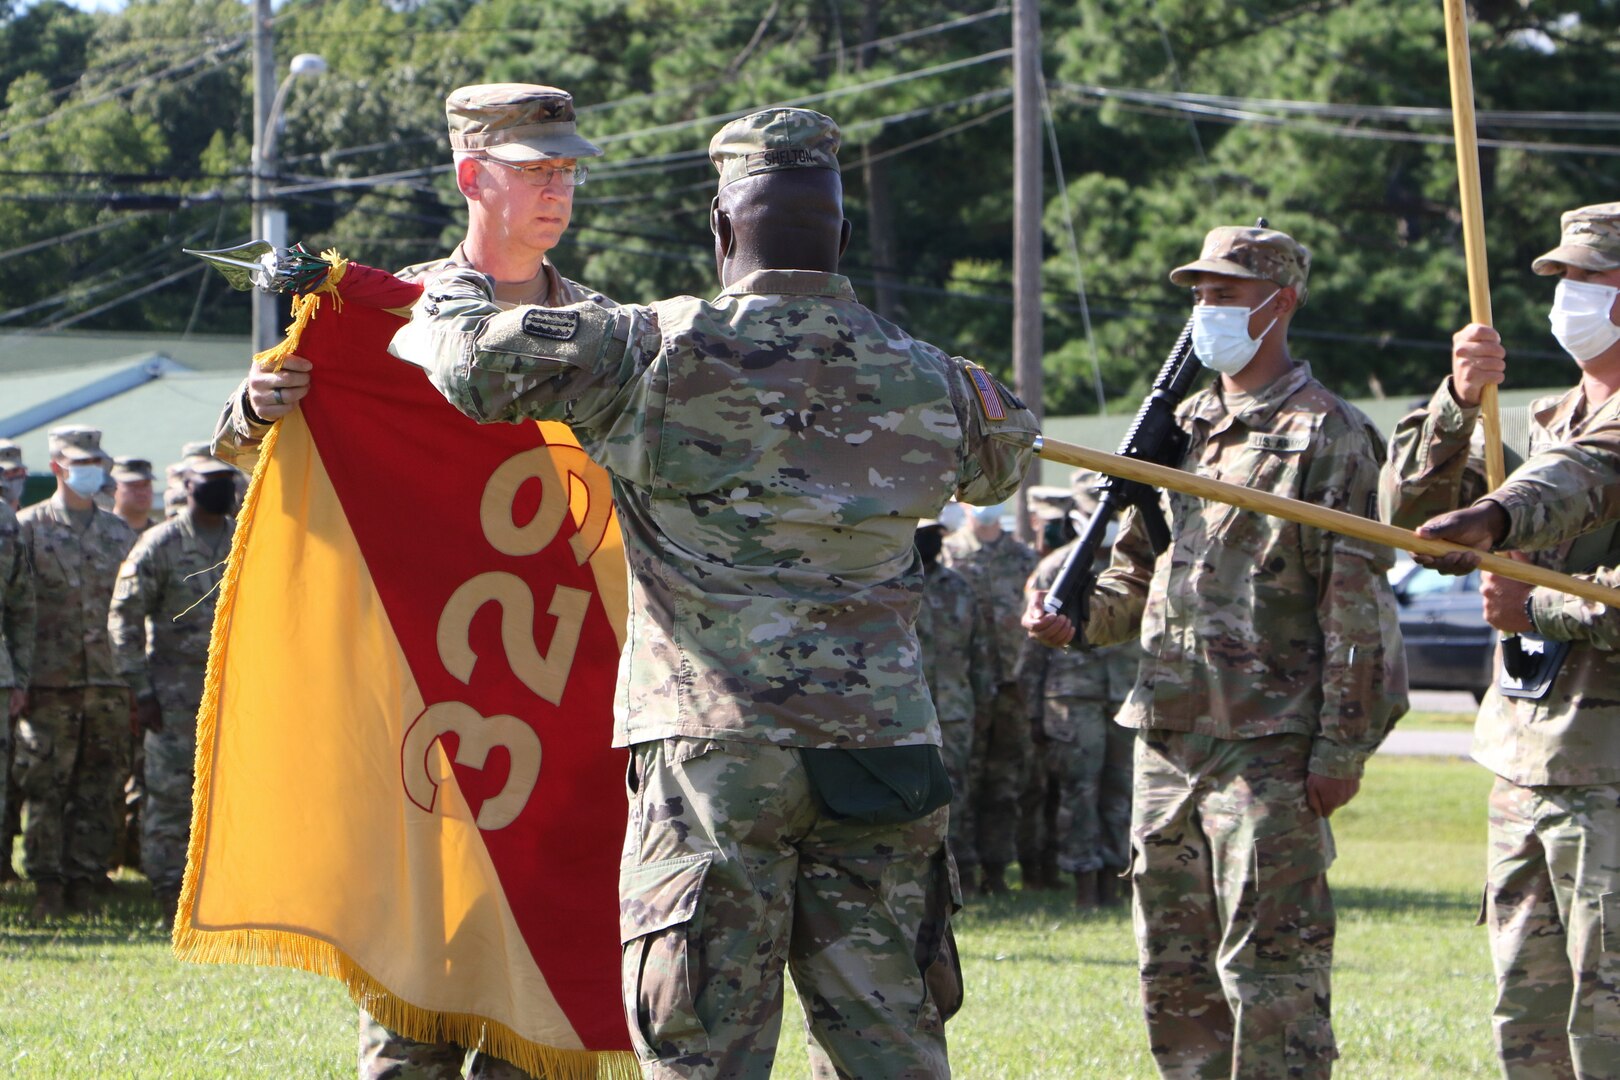 329th RSG begins federal duty, will deploy to Middle East